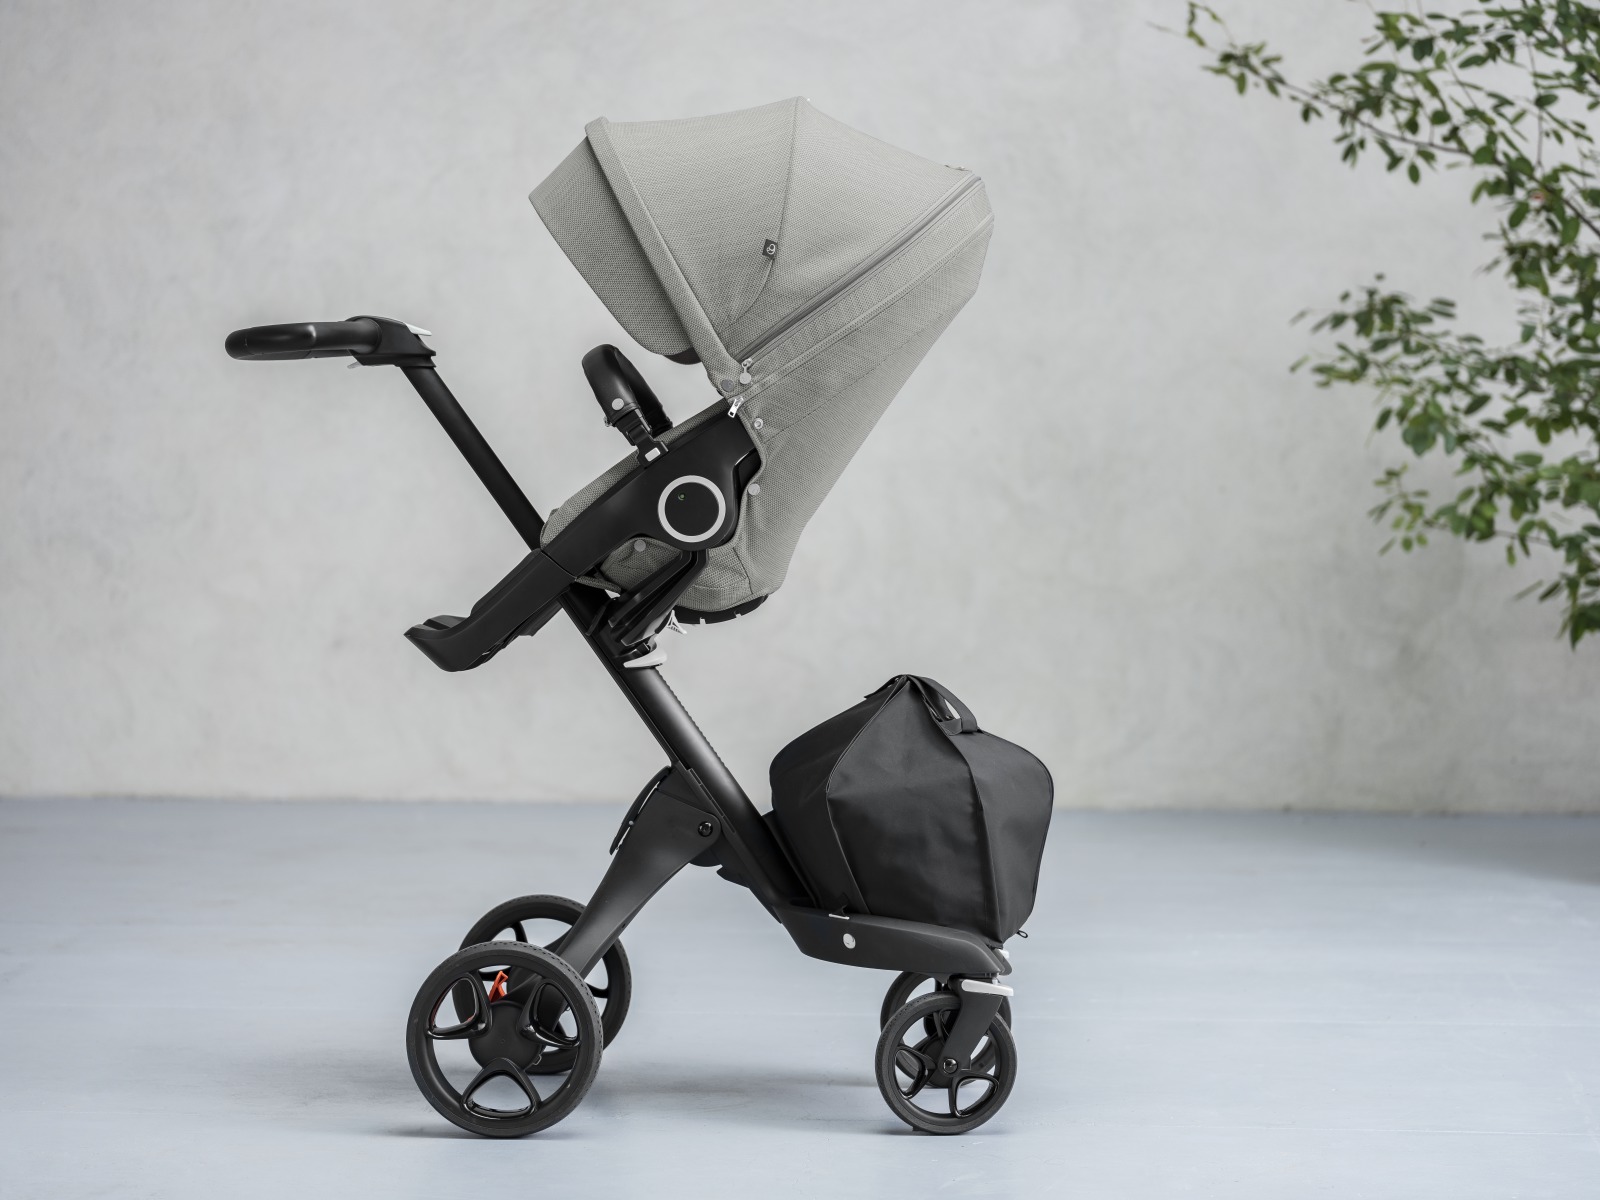 StokkeÂ® XploryÂ® with Black Chassis and StokkeÂ® Stroller Seat, Brushed Grey.